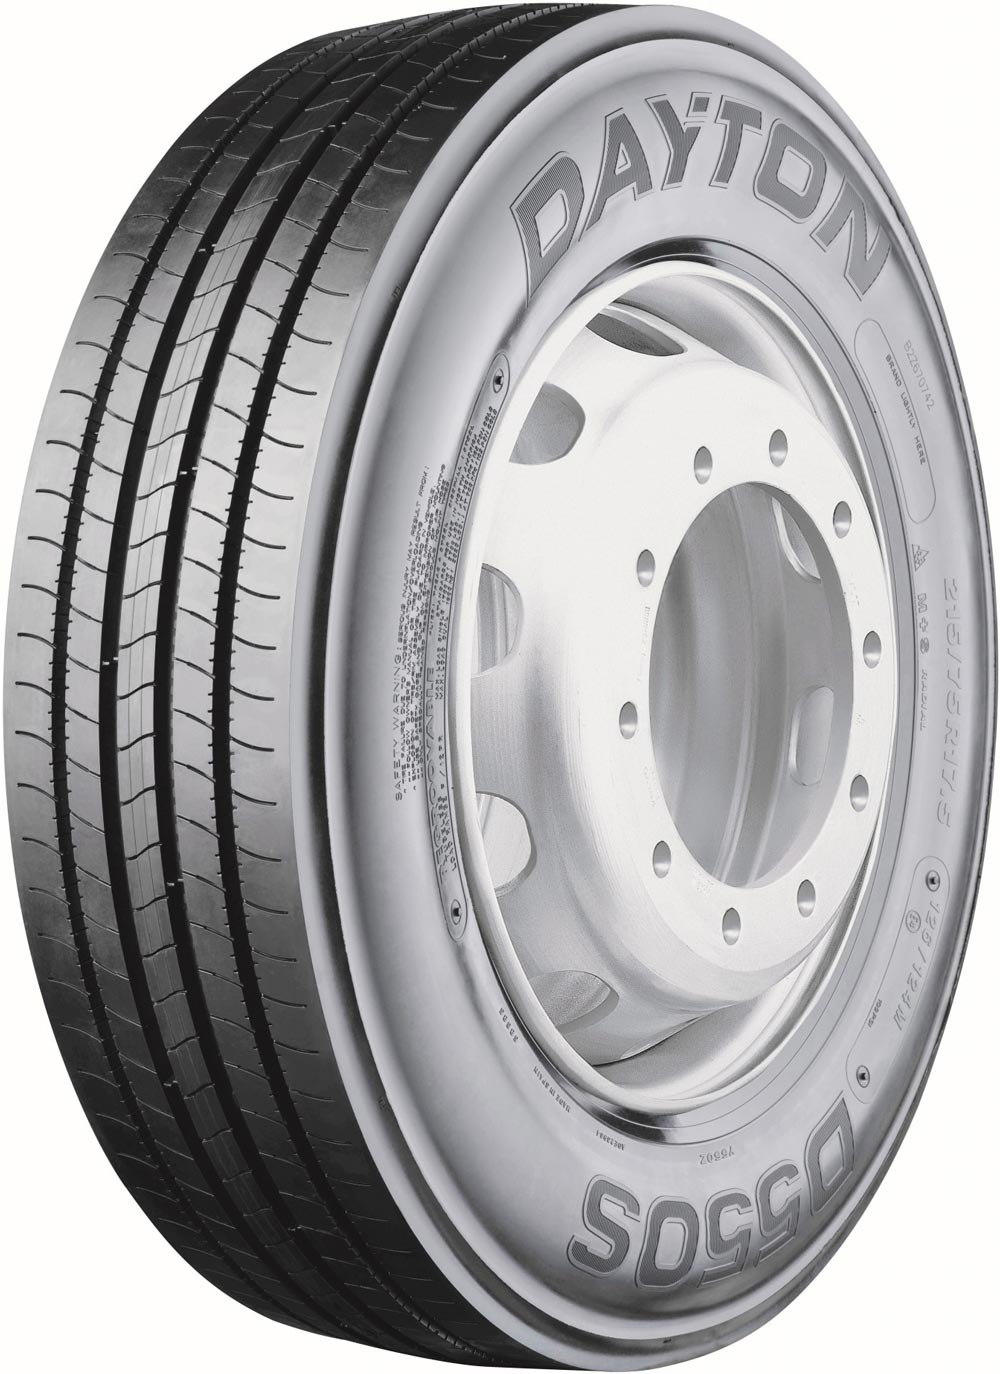 product_type-heavy_tires DAYTON D550S 235/75 R17.5 132M